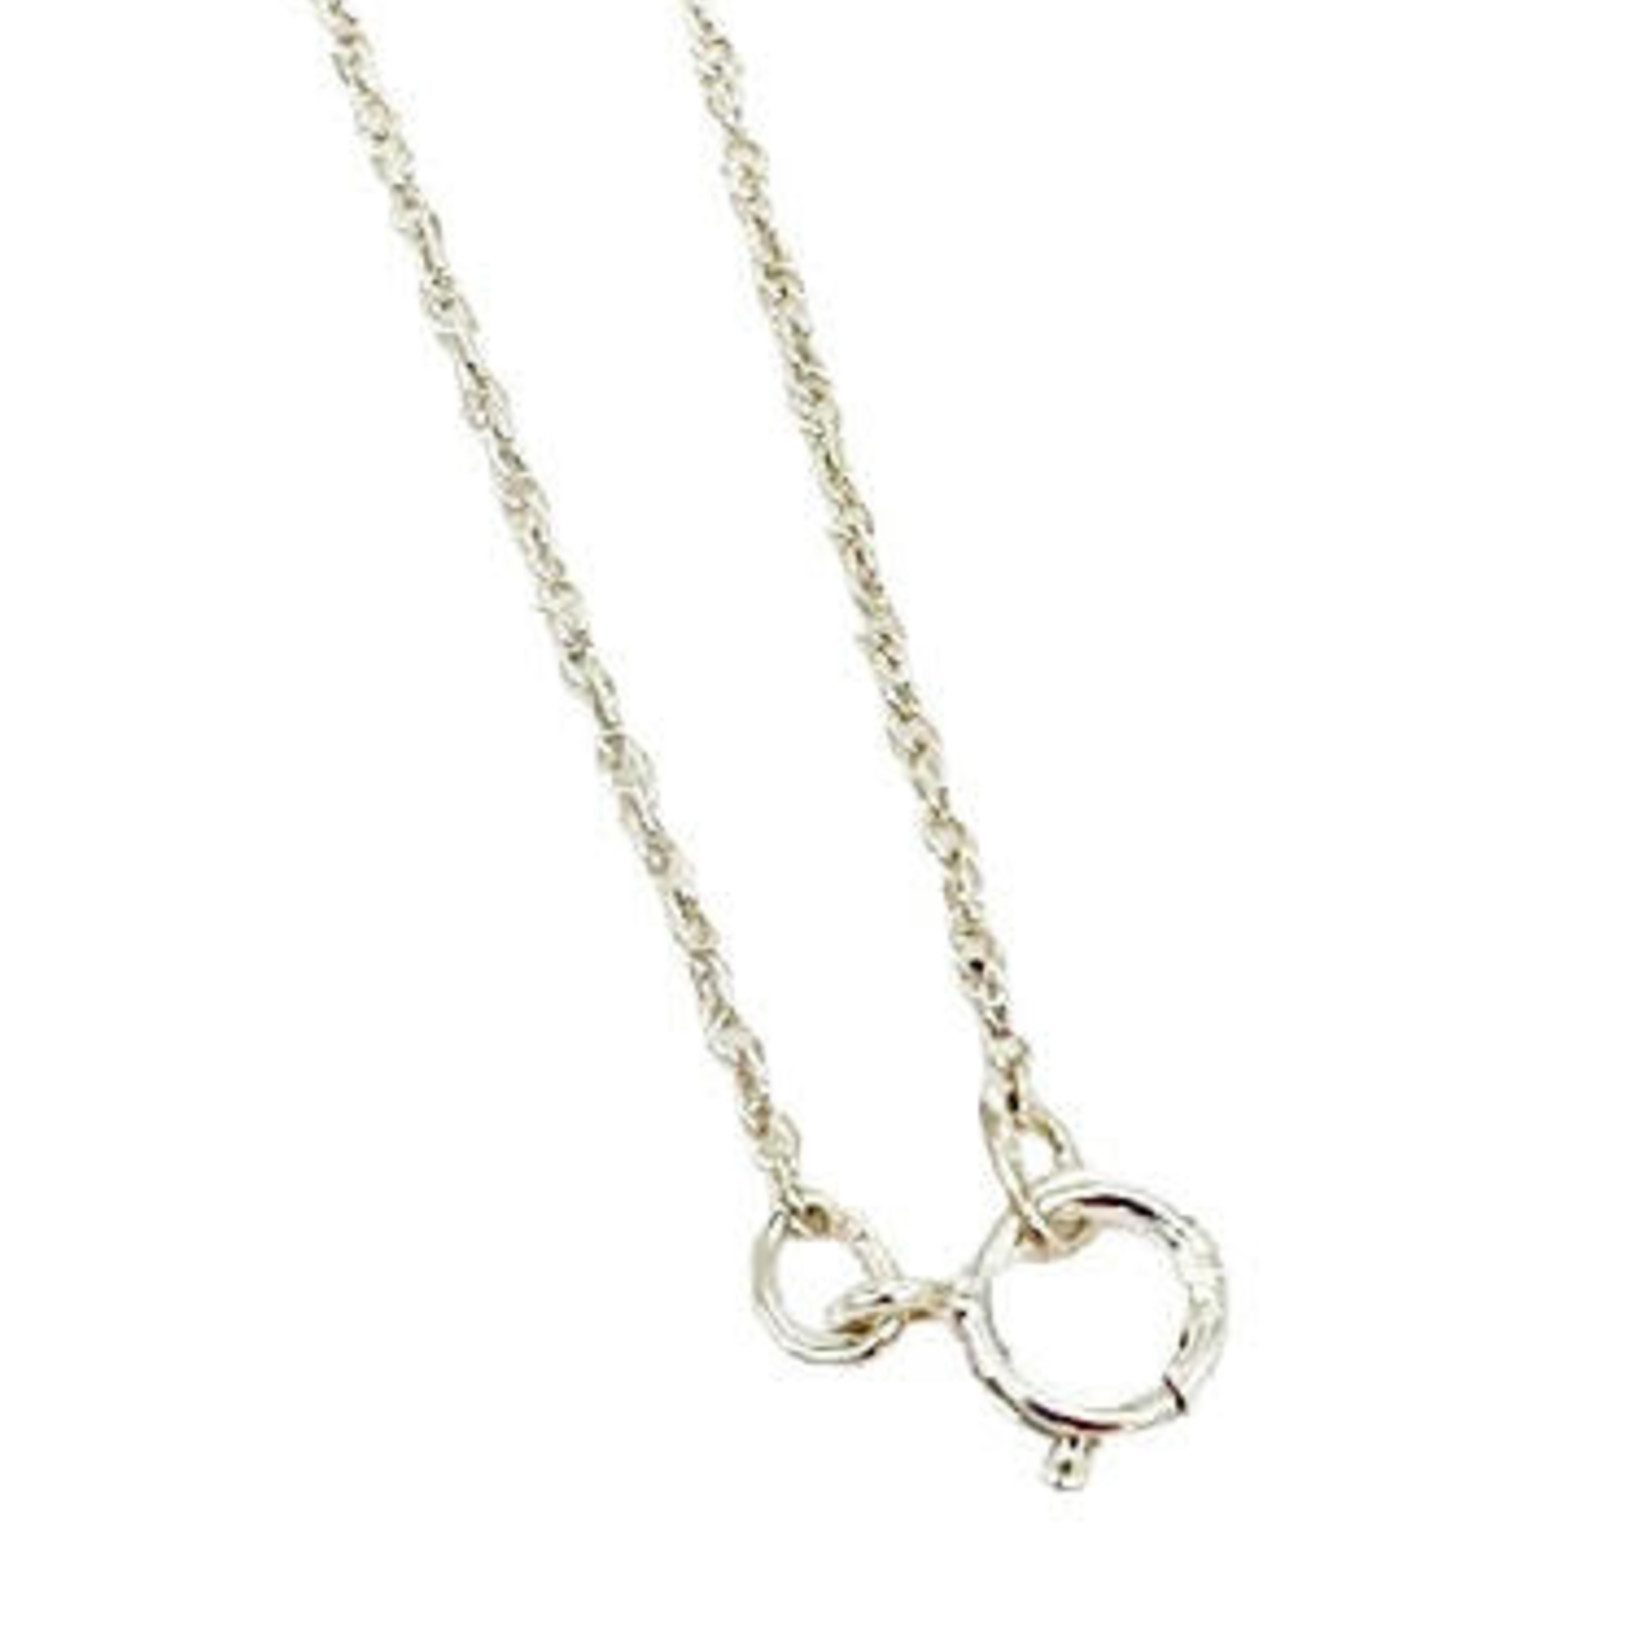 Sterling Silver Rope Chain 16"